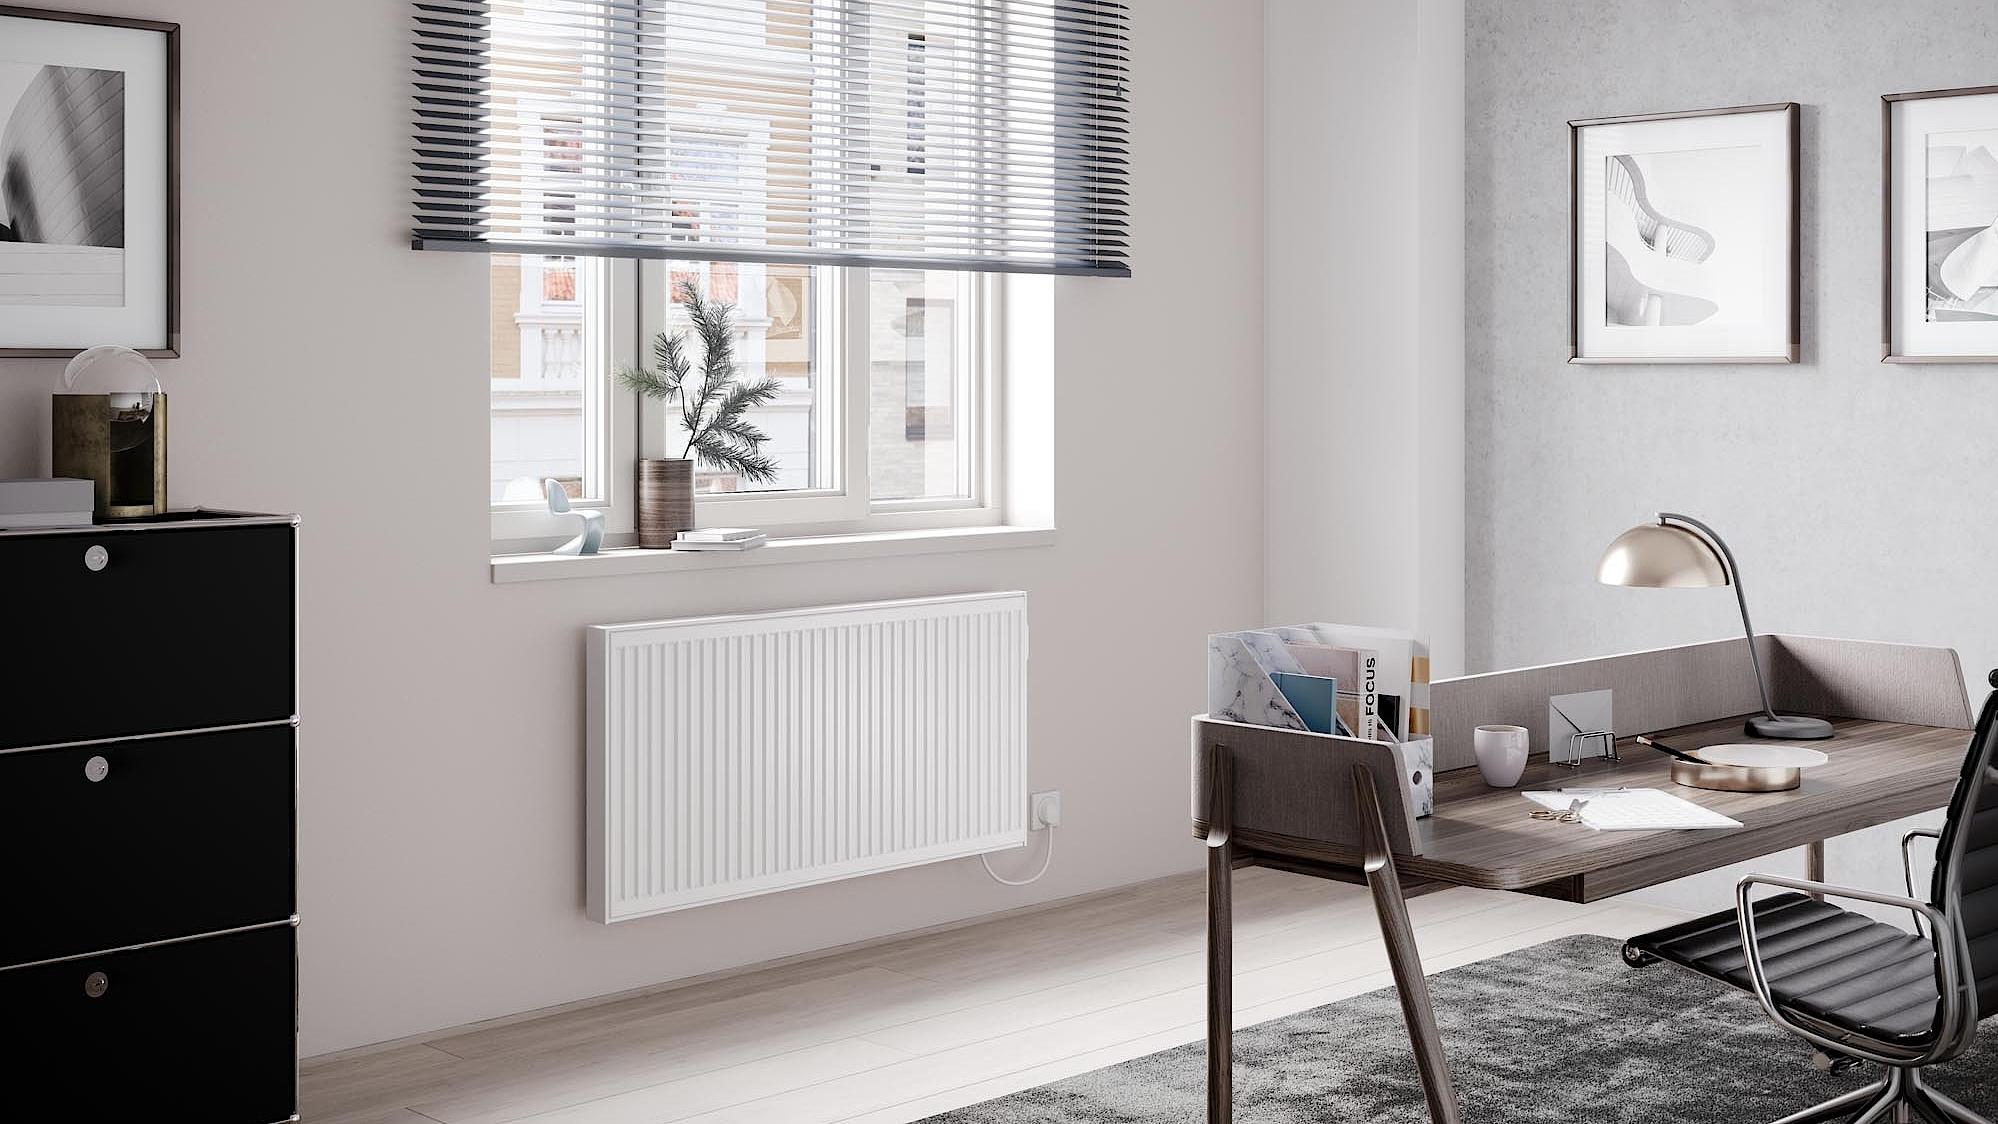 Kermi x-therm +e Profil horizontal electric steel panel radiators with a profiled surface look.